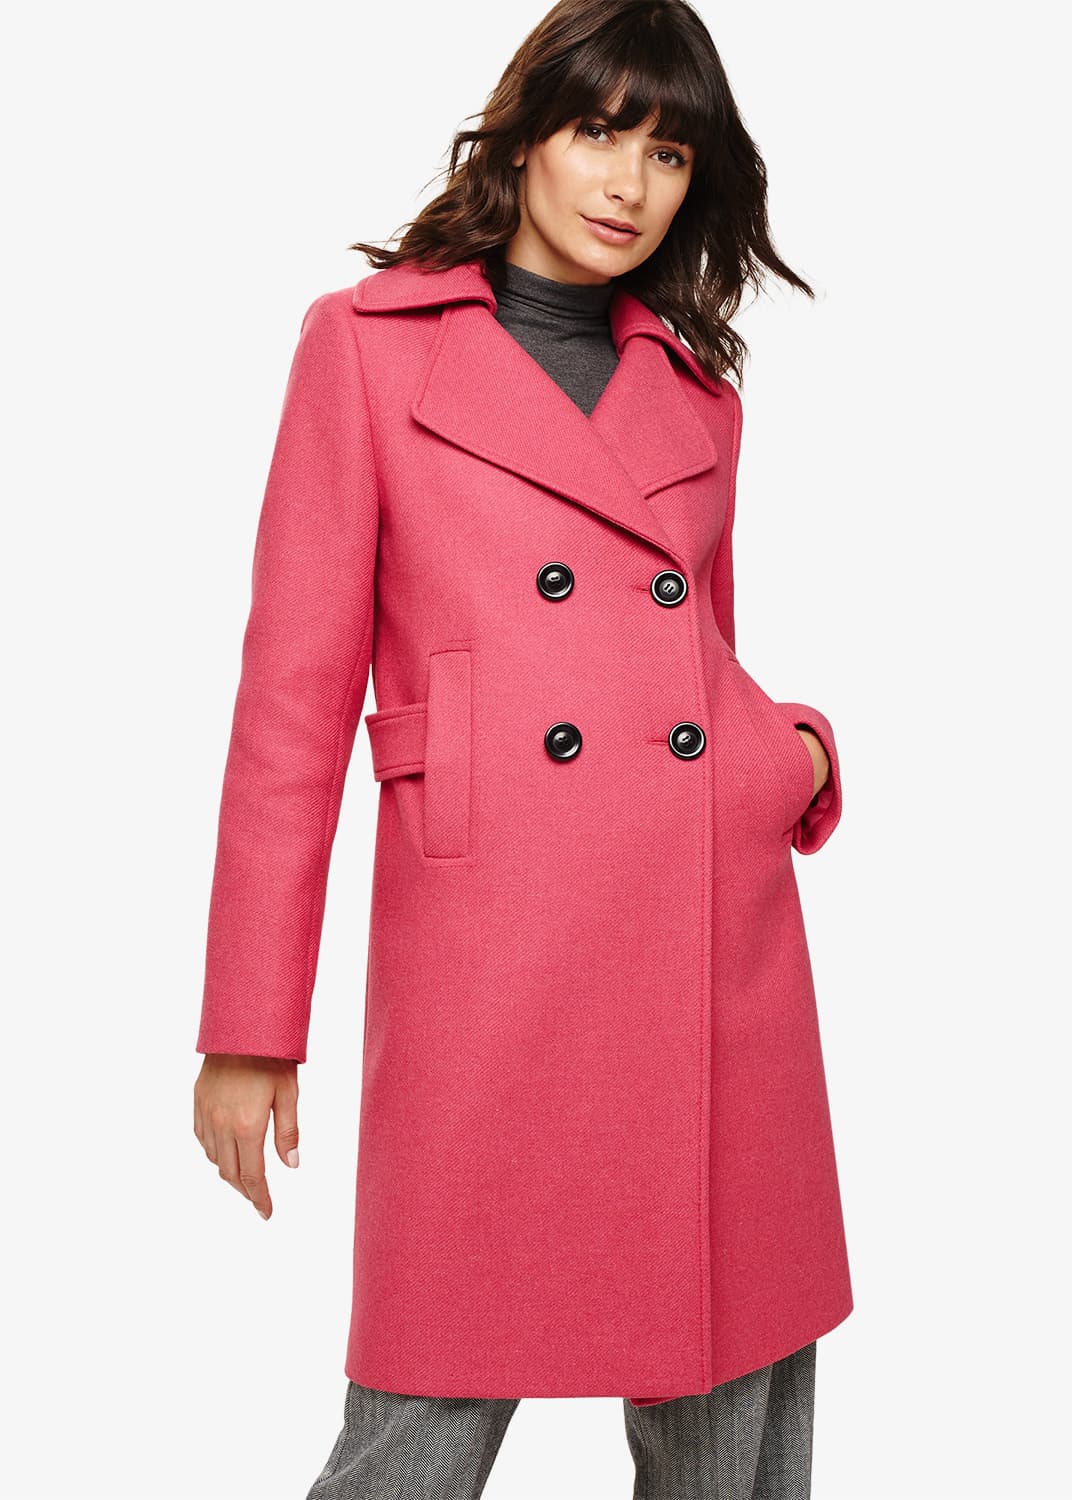 Phase Eight Women's Fairlie Double Breasted Coat